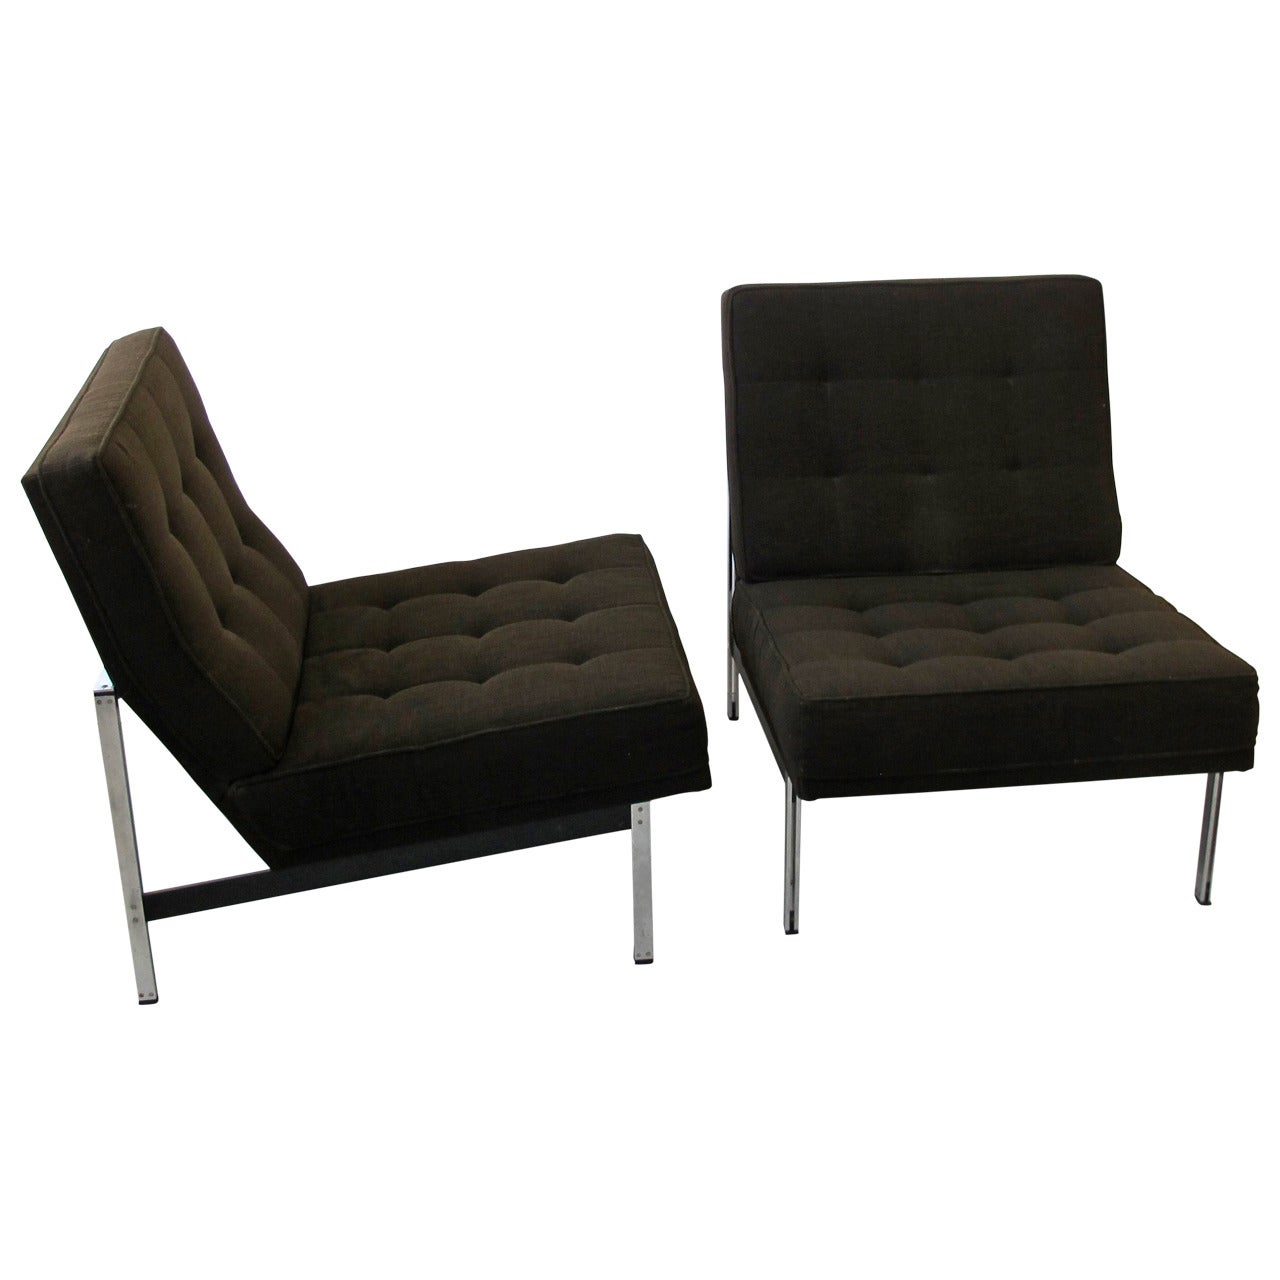 Pair of Parallel Bar Lounge Chairs by Florence Knoll, circa 1955